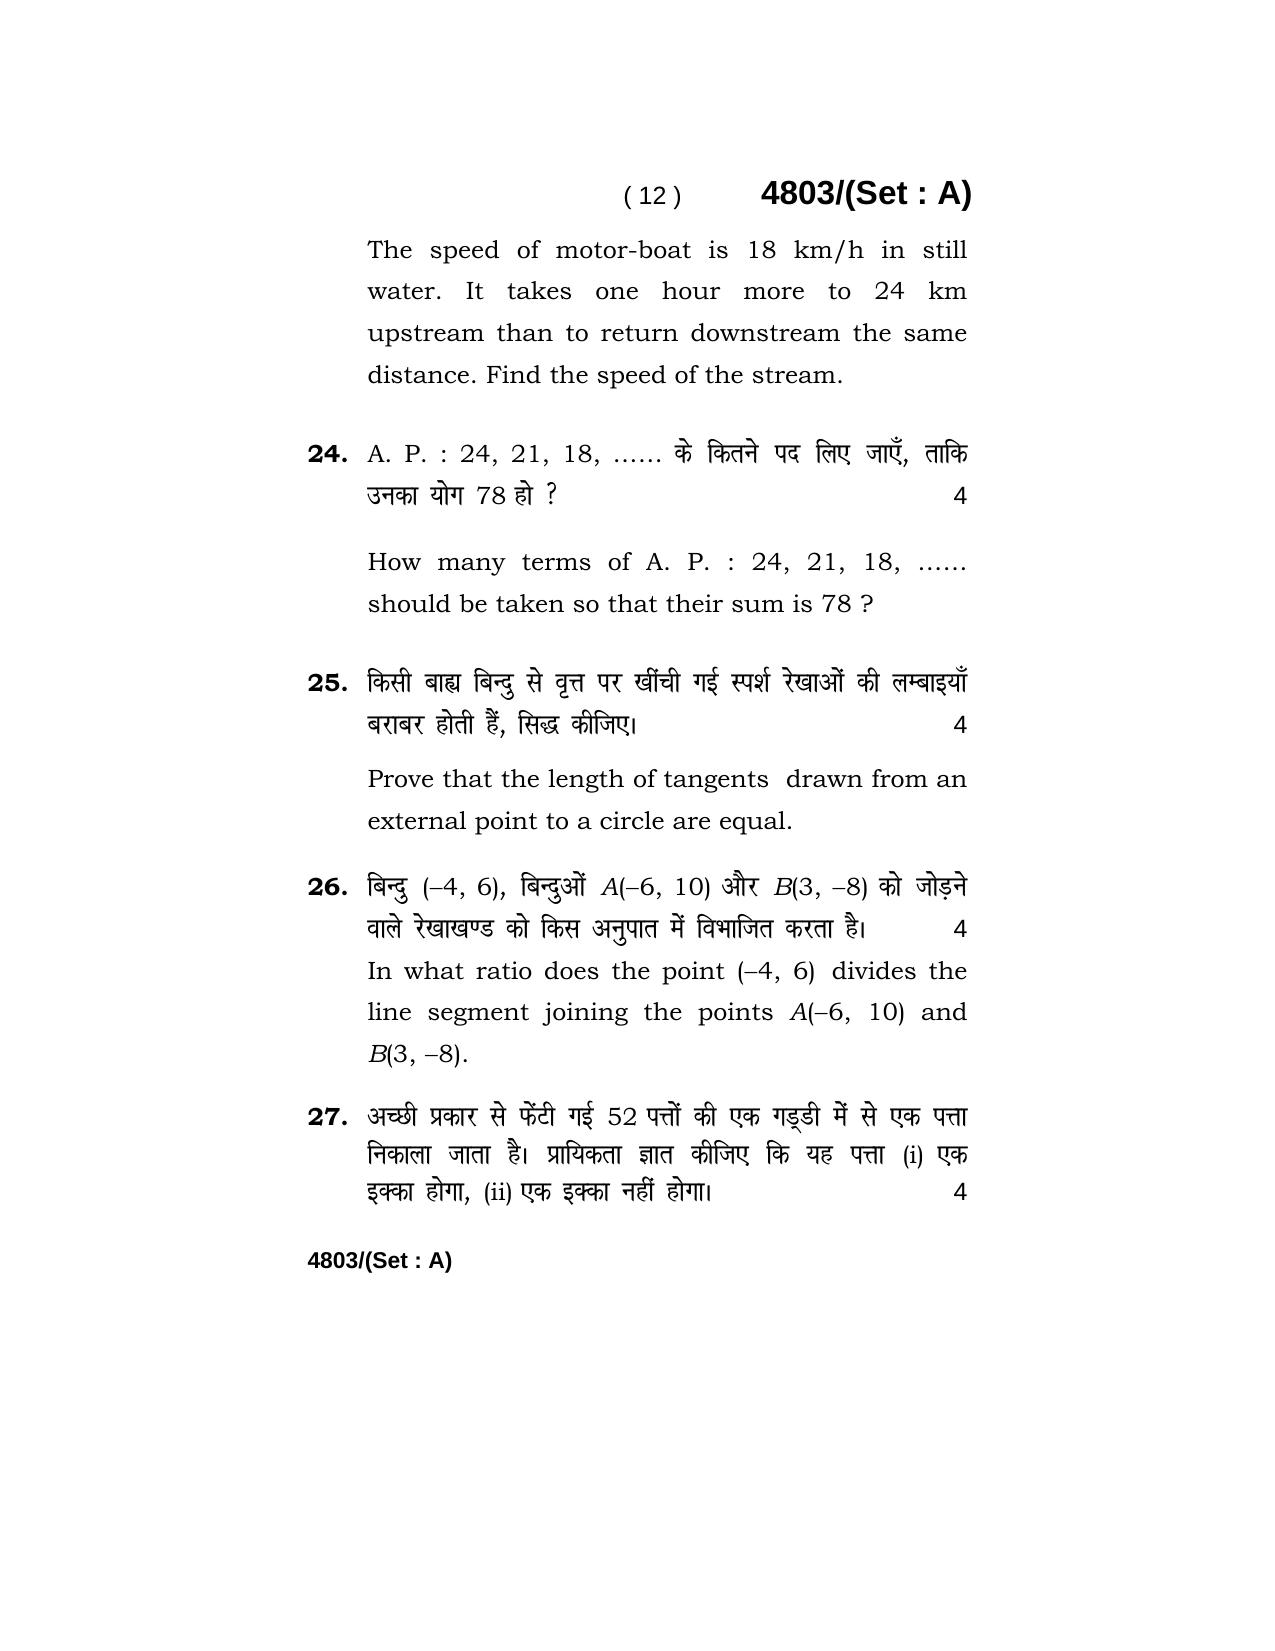 Haryana Board HBSE Class 10 Mathematics 2020 Question Paper - Page 12